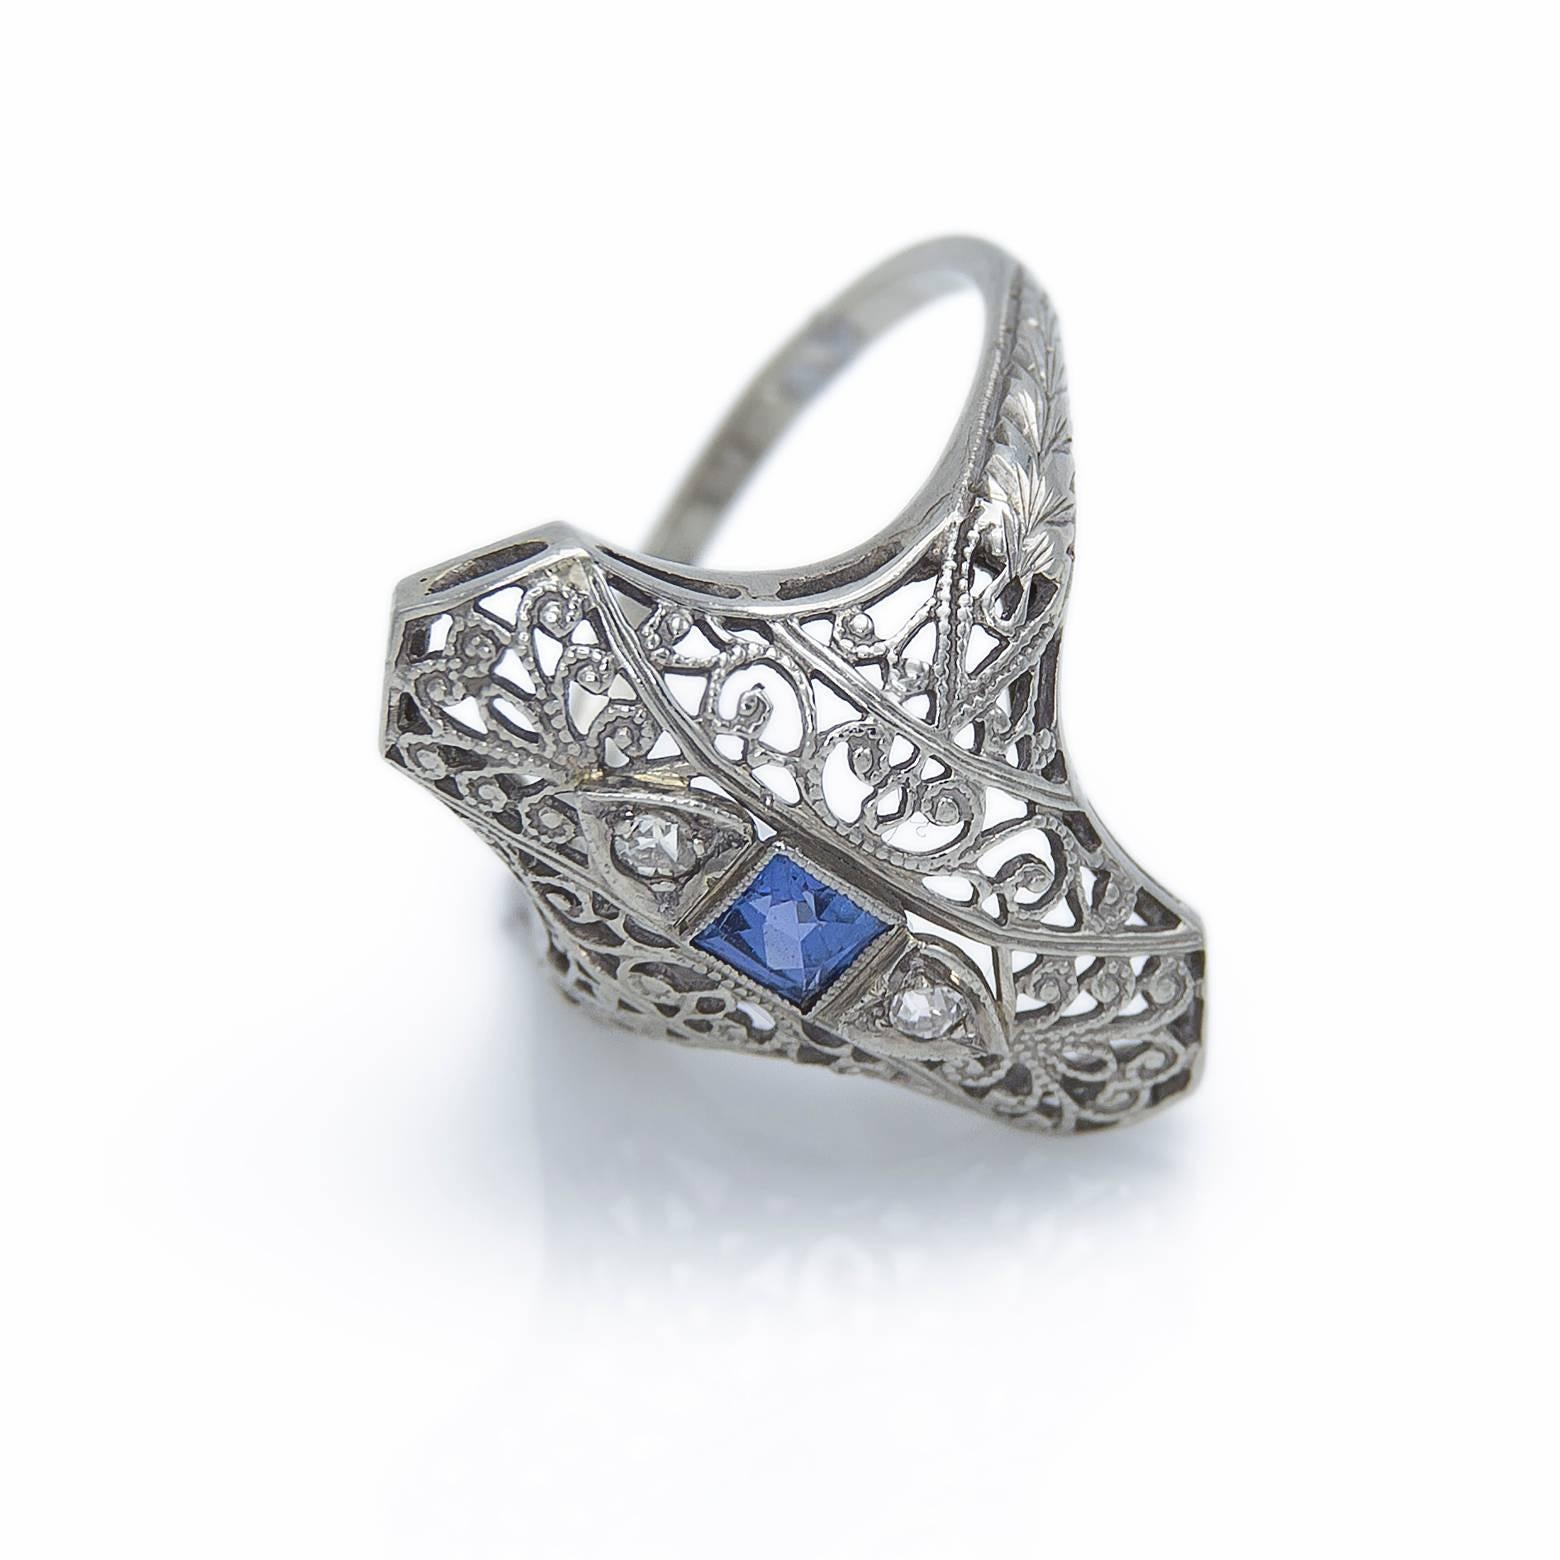 This is a unique and detail oriented piece with intricate filigree work classic of the 1930's Art Deco Era. Adorned with 2 diamonds equaling 0.05 carats and a square blue sapphire in the middle (0.13 carats) this piece exudes brilliance like a